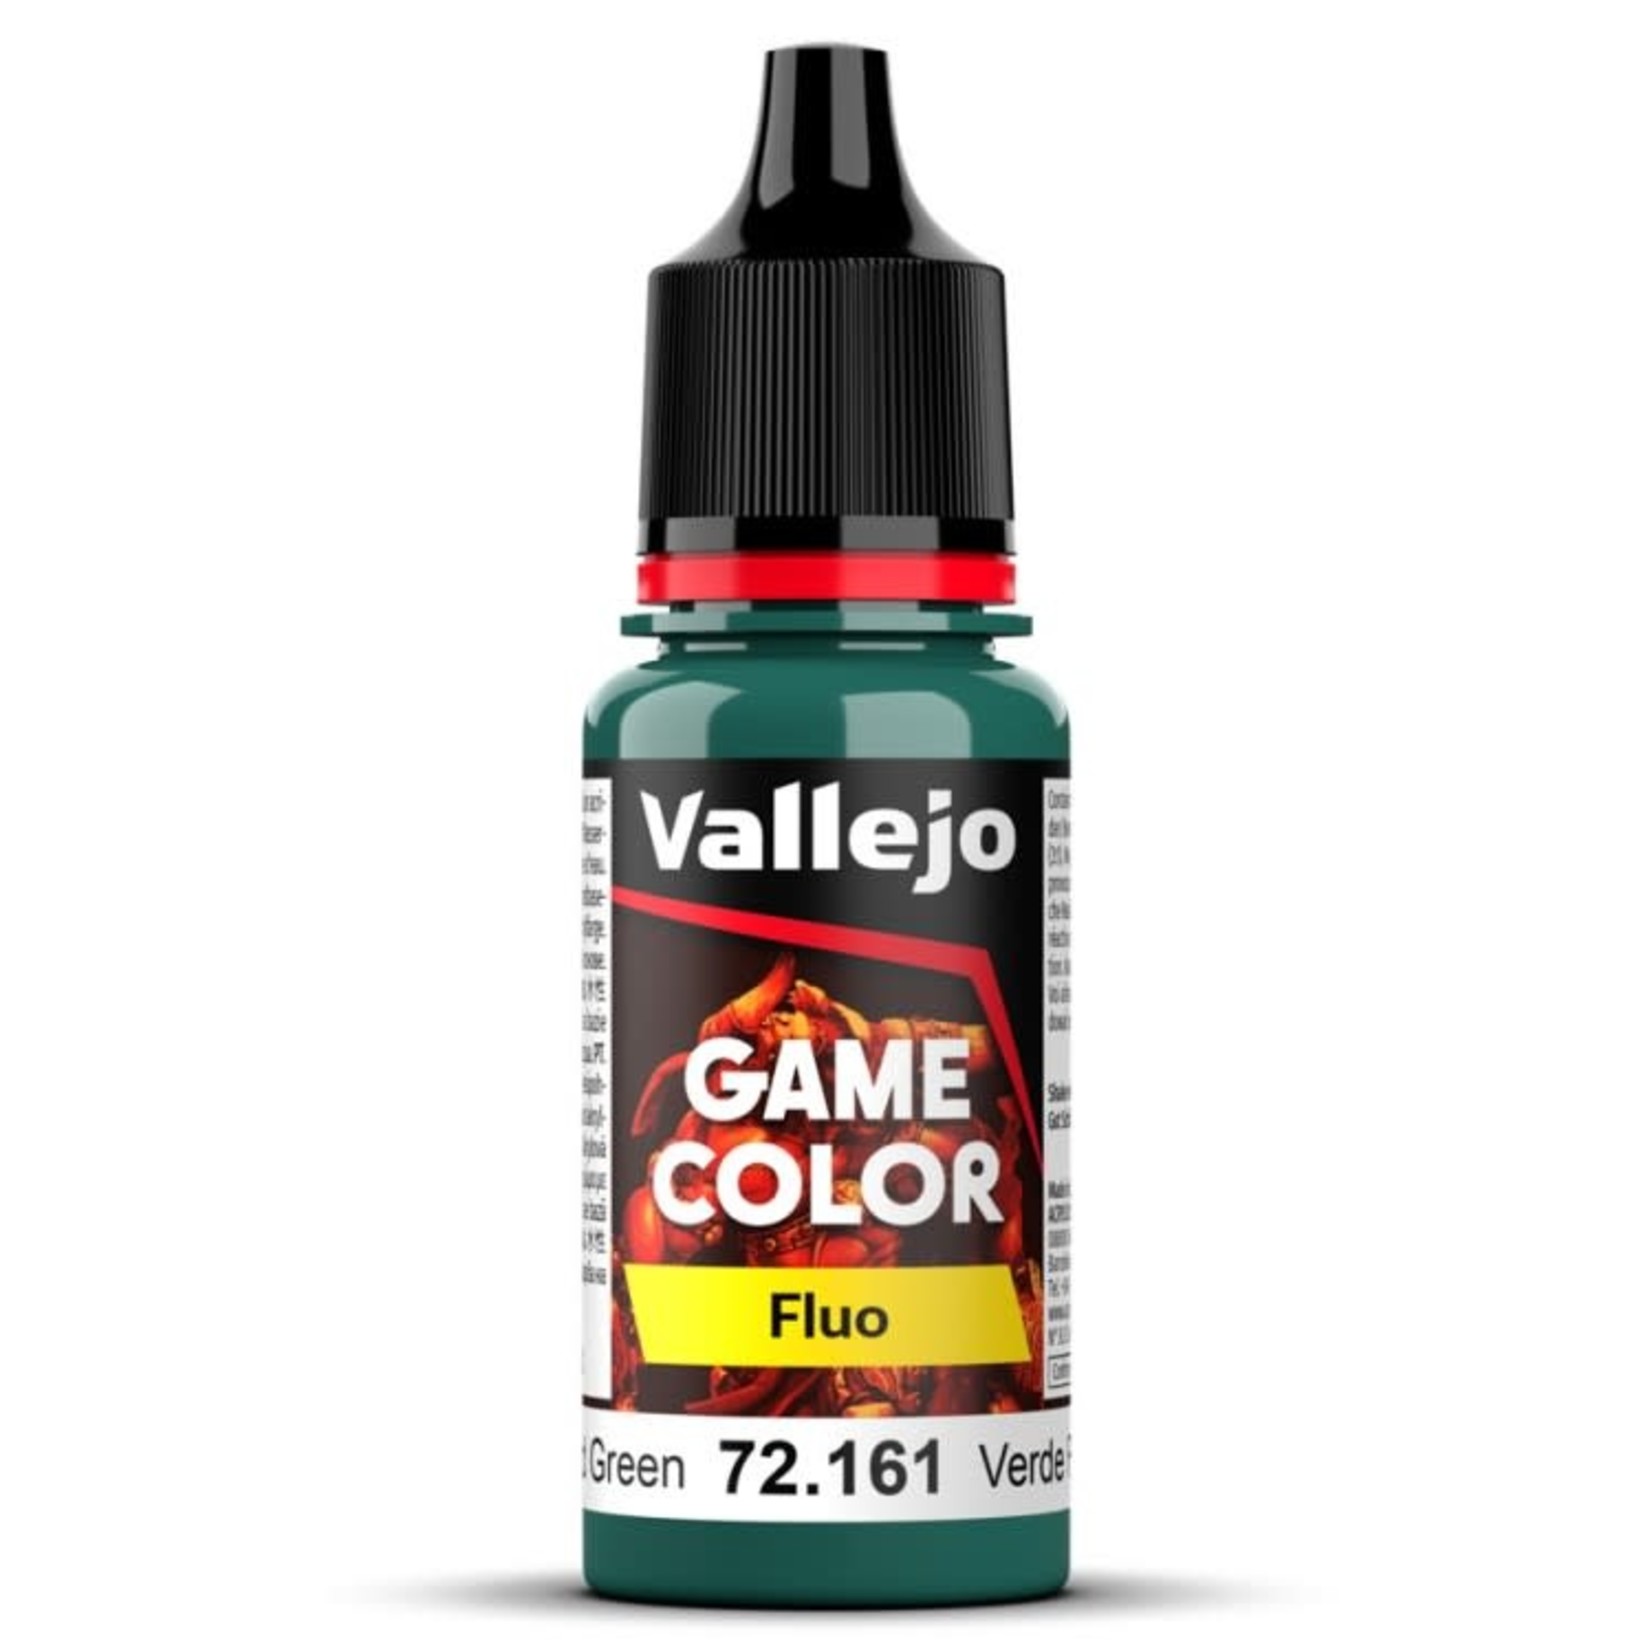 Vallejo Paint: Game Color, Fluo (Cold Green)